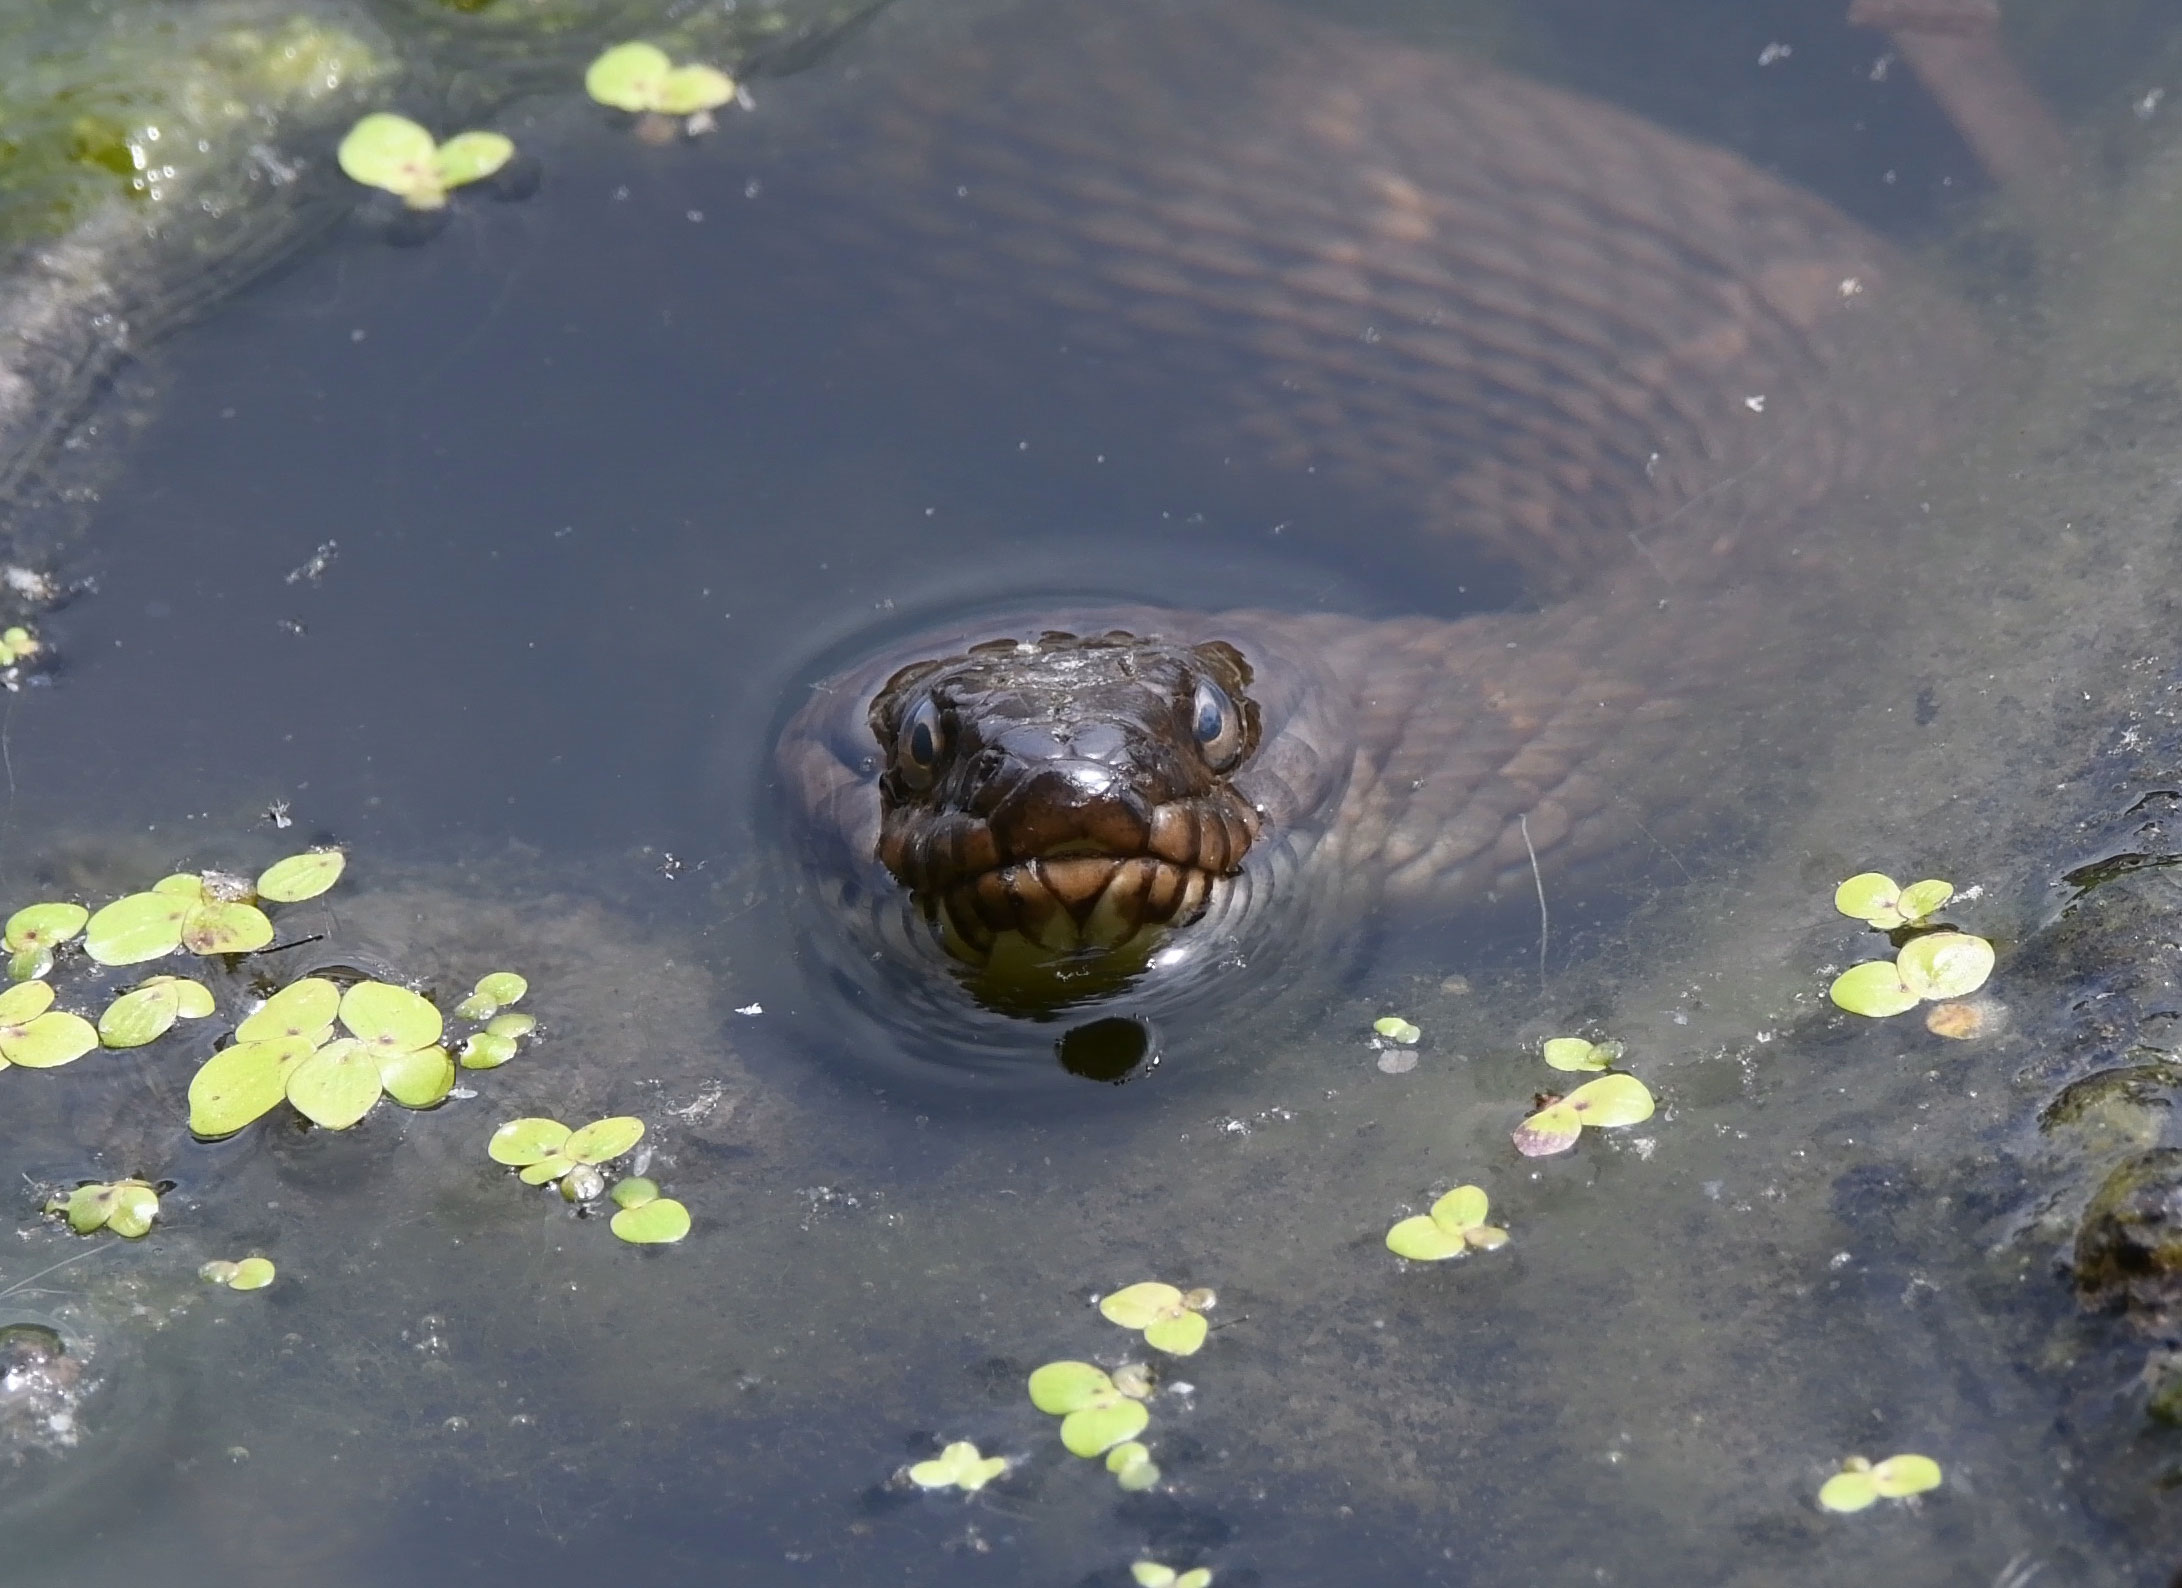 Northern water snake poking its head out of the water.